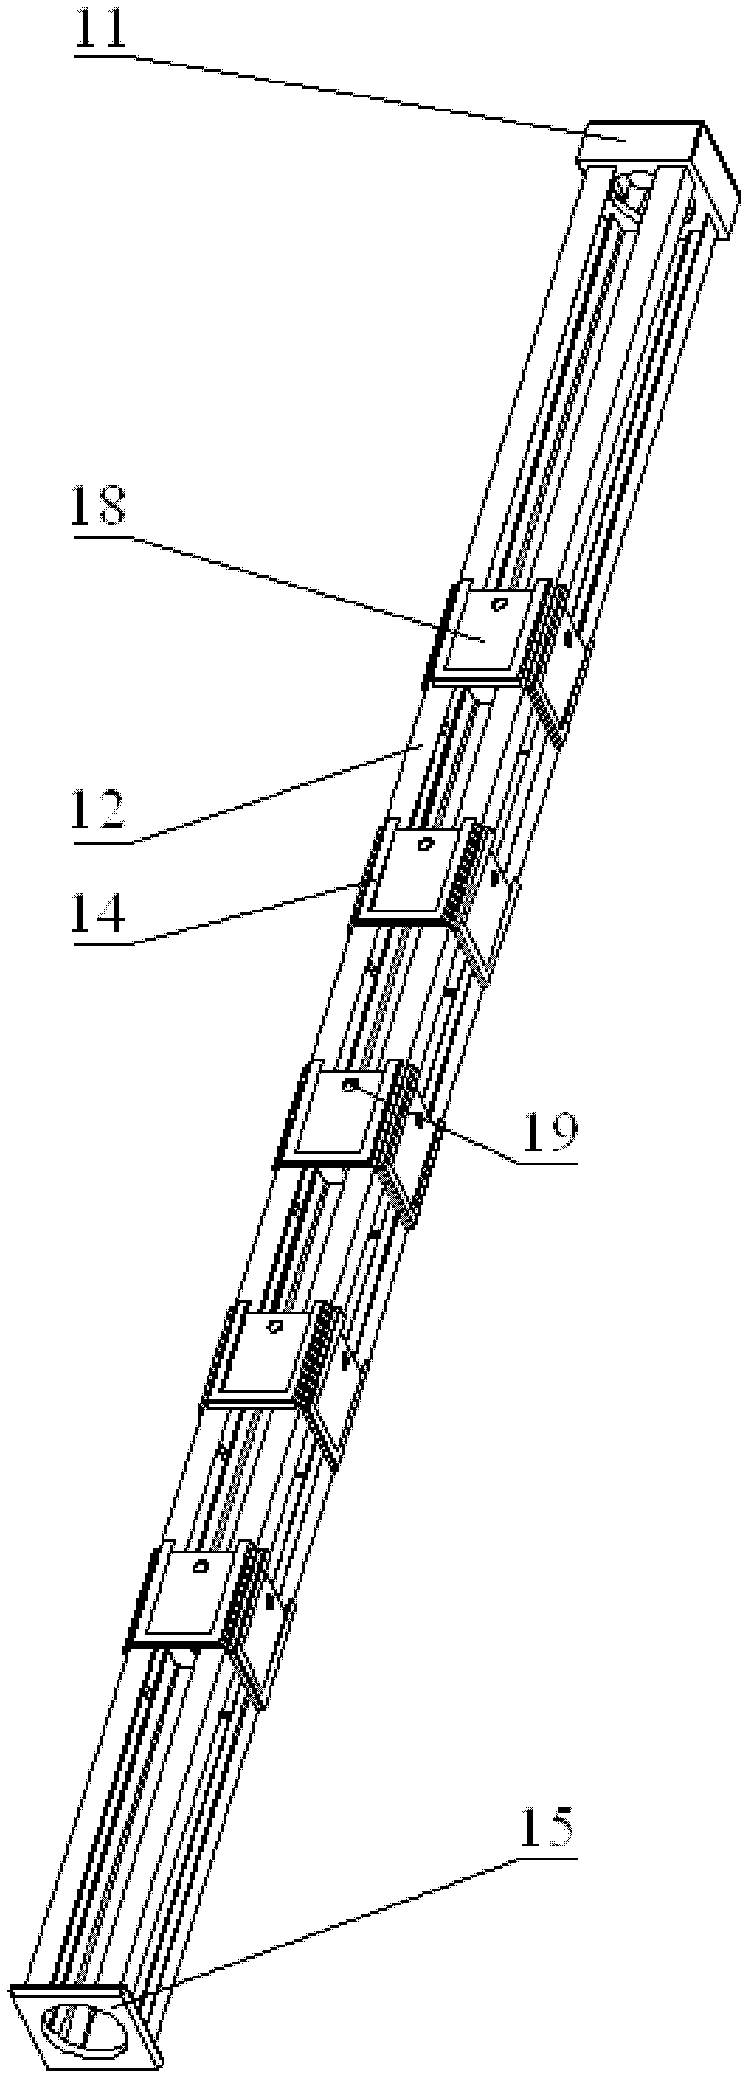 Device for suspending nuclear power station neutron poison sample